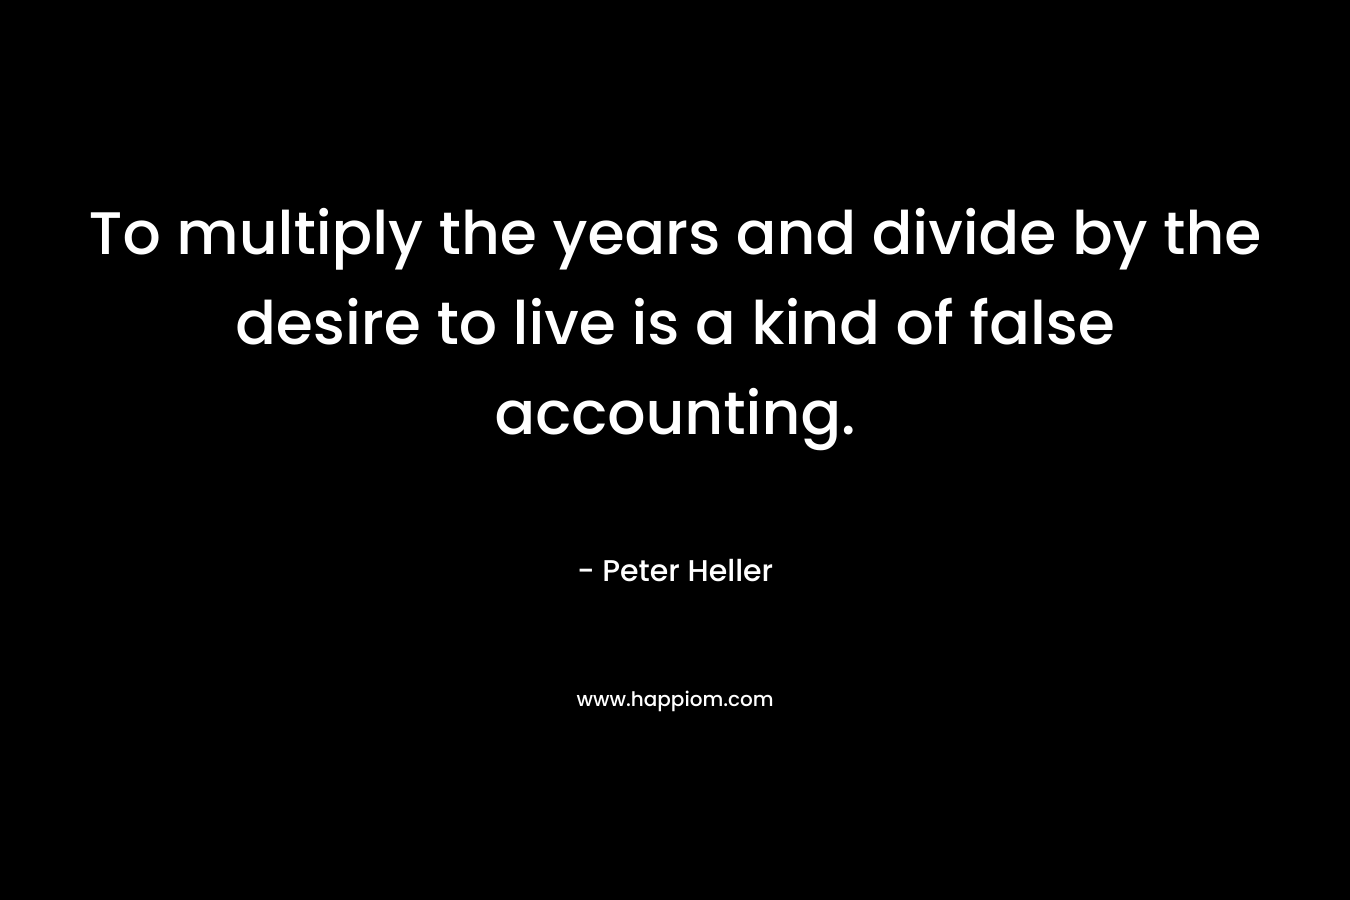 To multiply the years and divide by the desire to live is a kind of false accounting. – Peter Heller